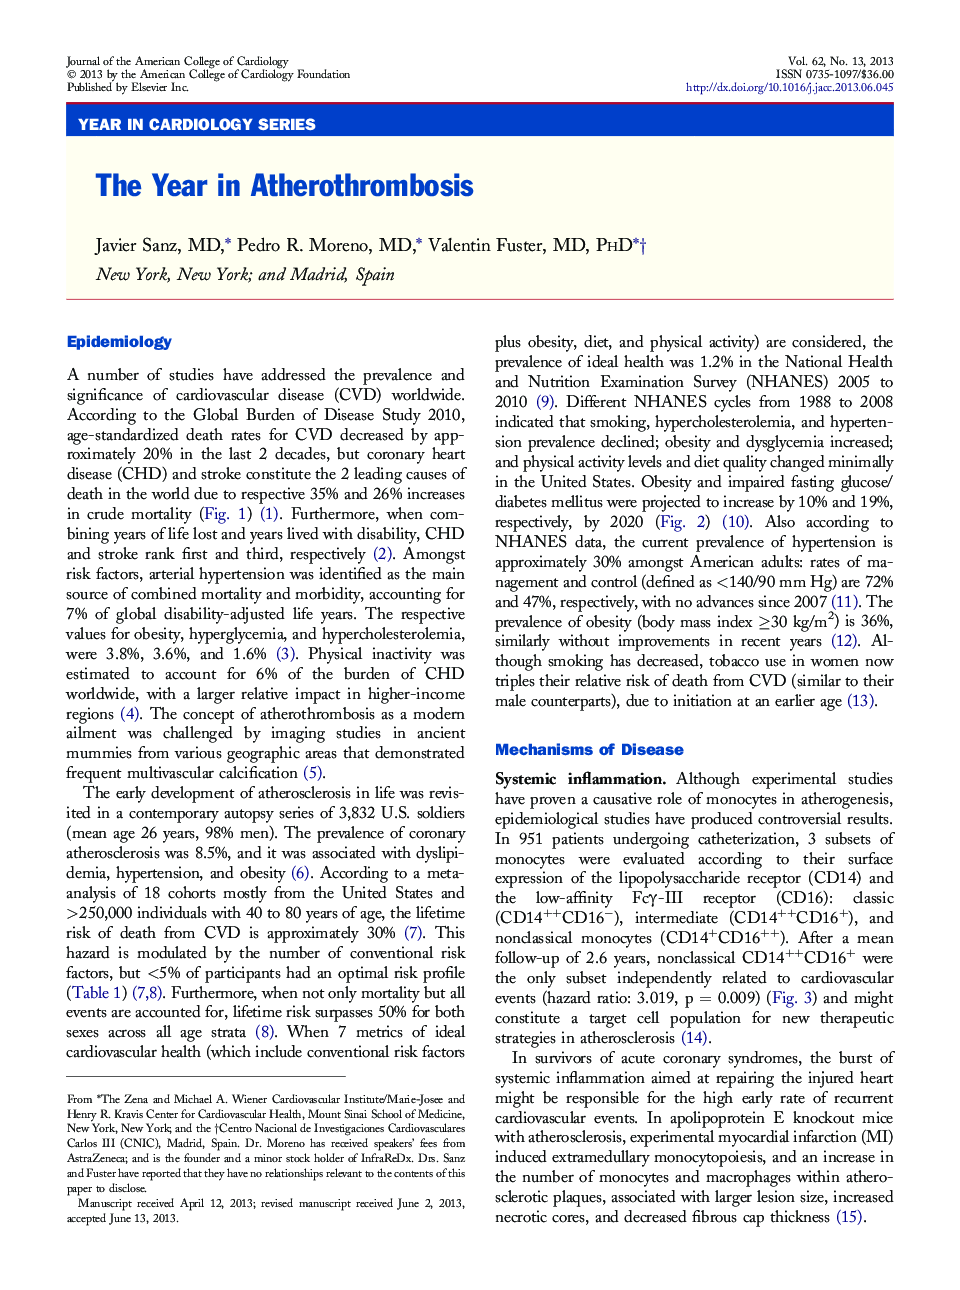 The Year in Atherothrombosis